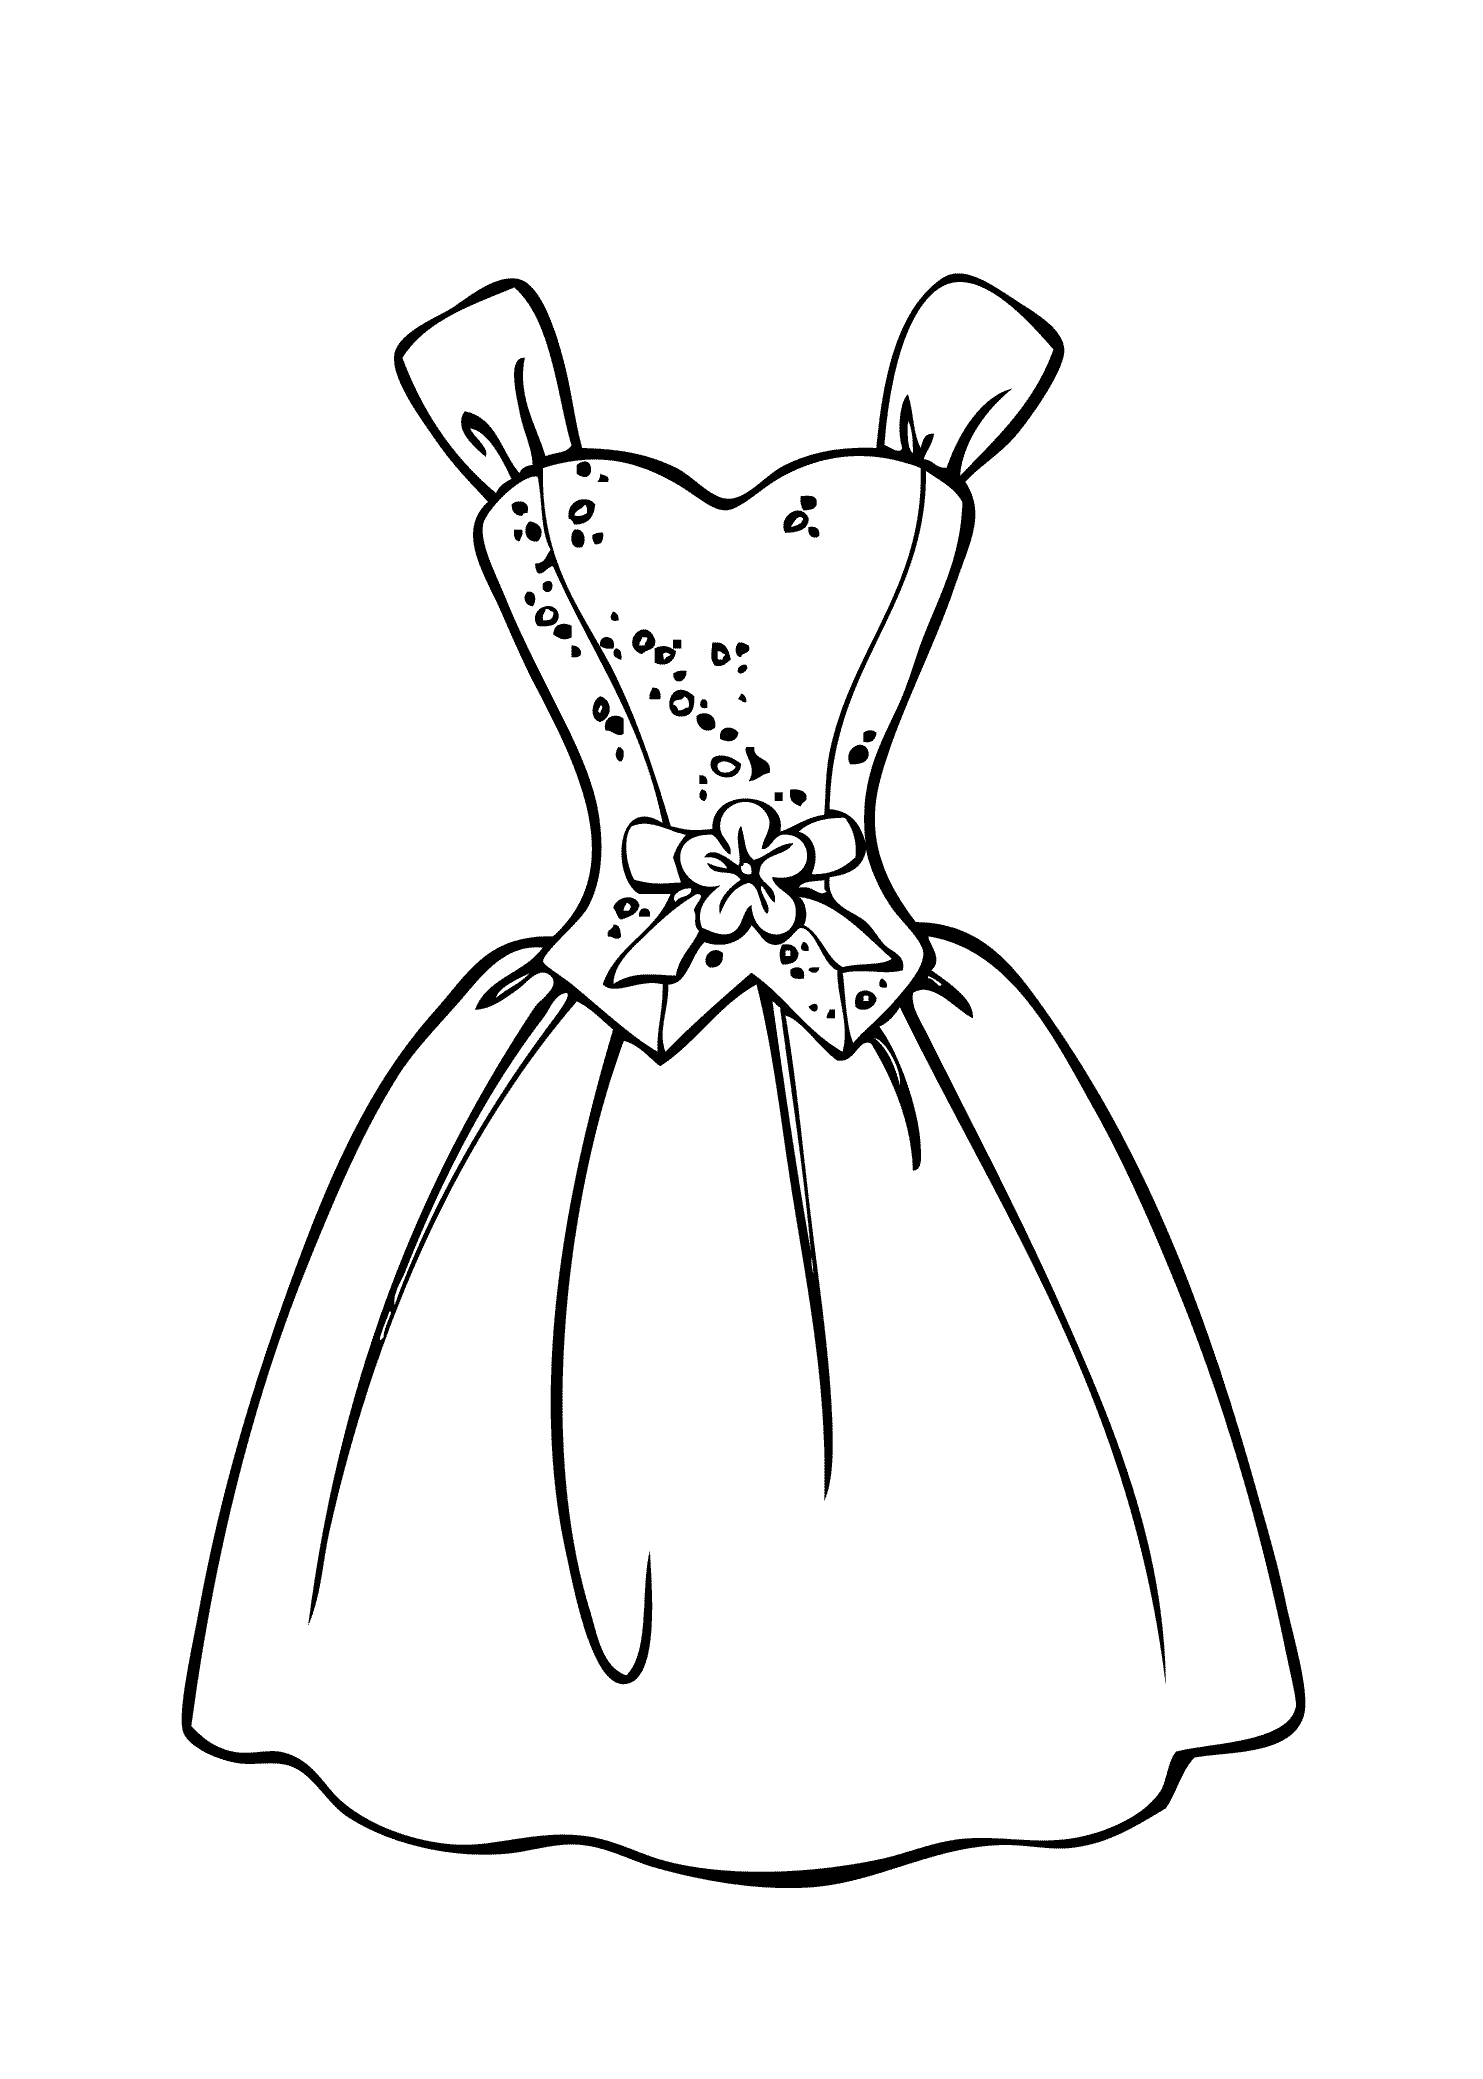 colouring clothes dress coloring pages to download and print for free colouring clothes 